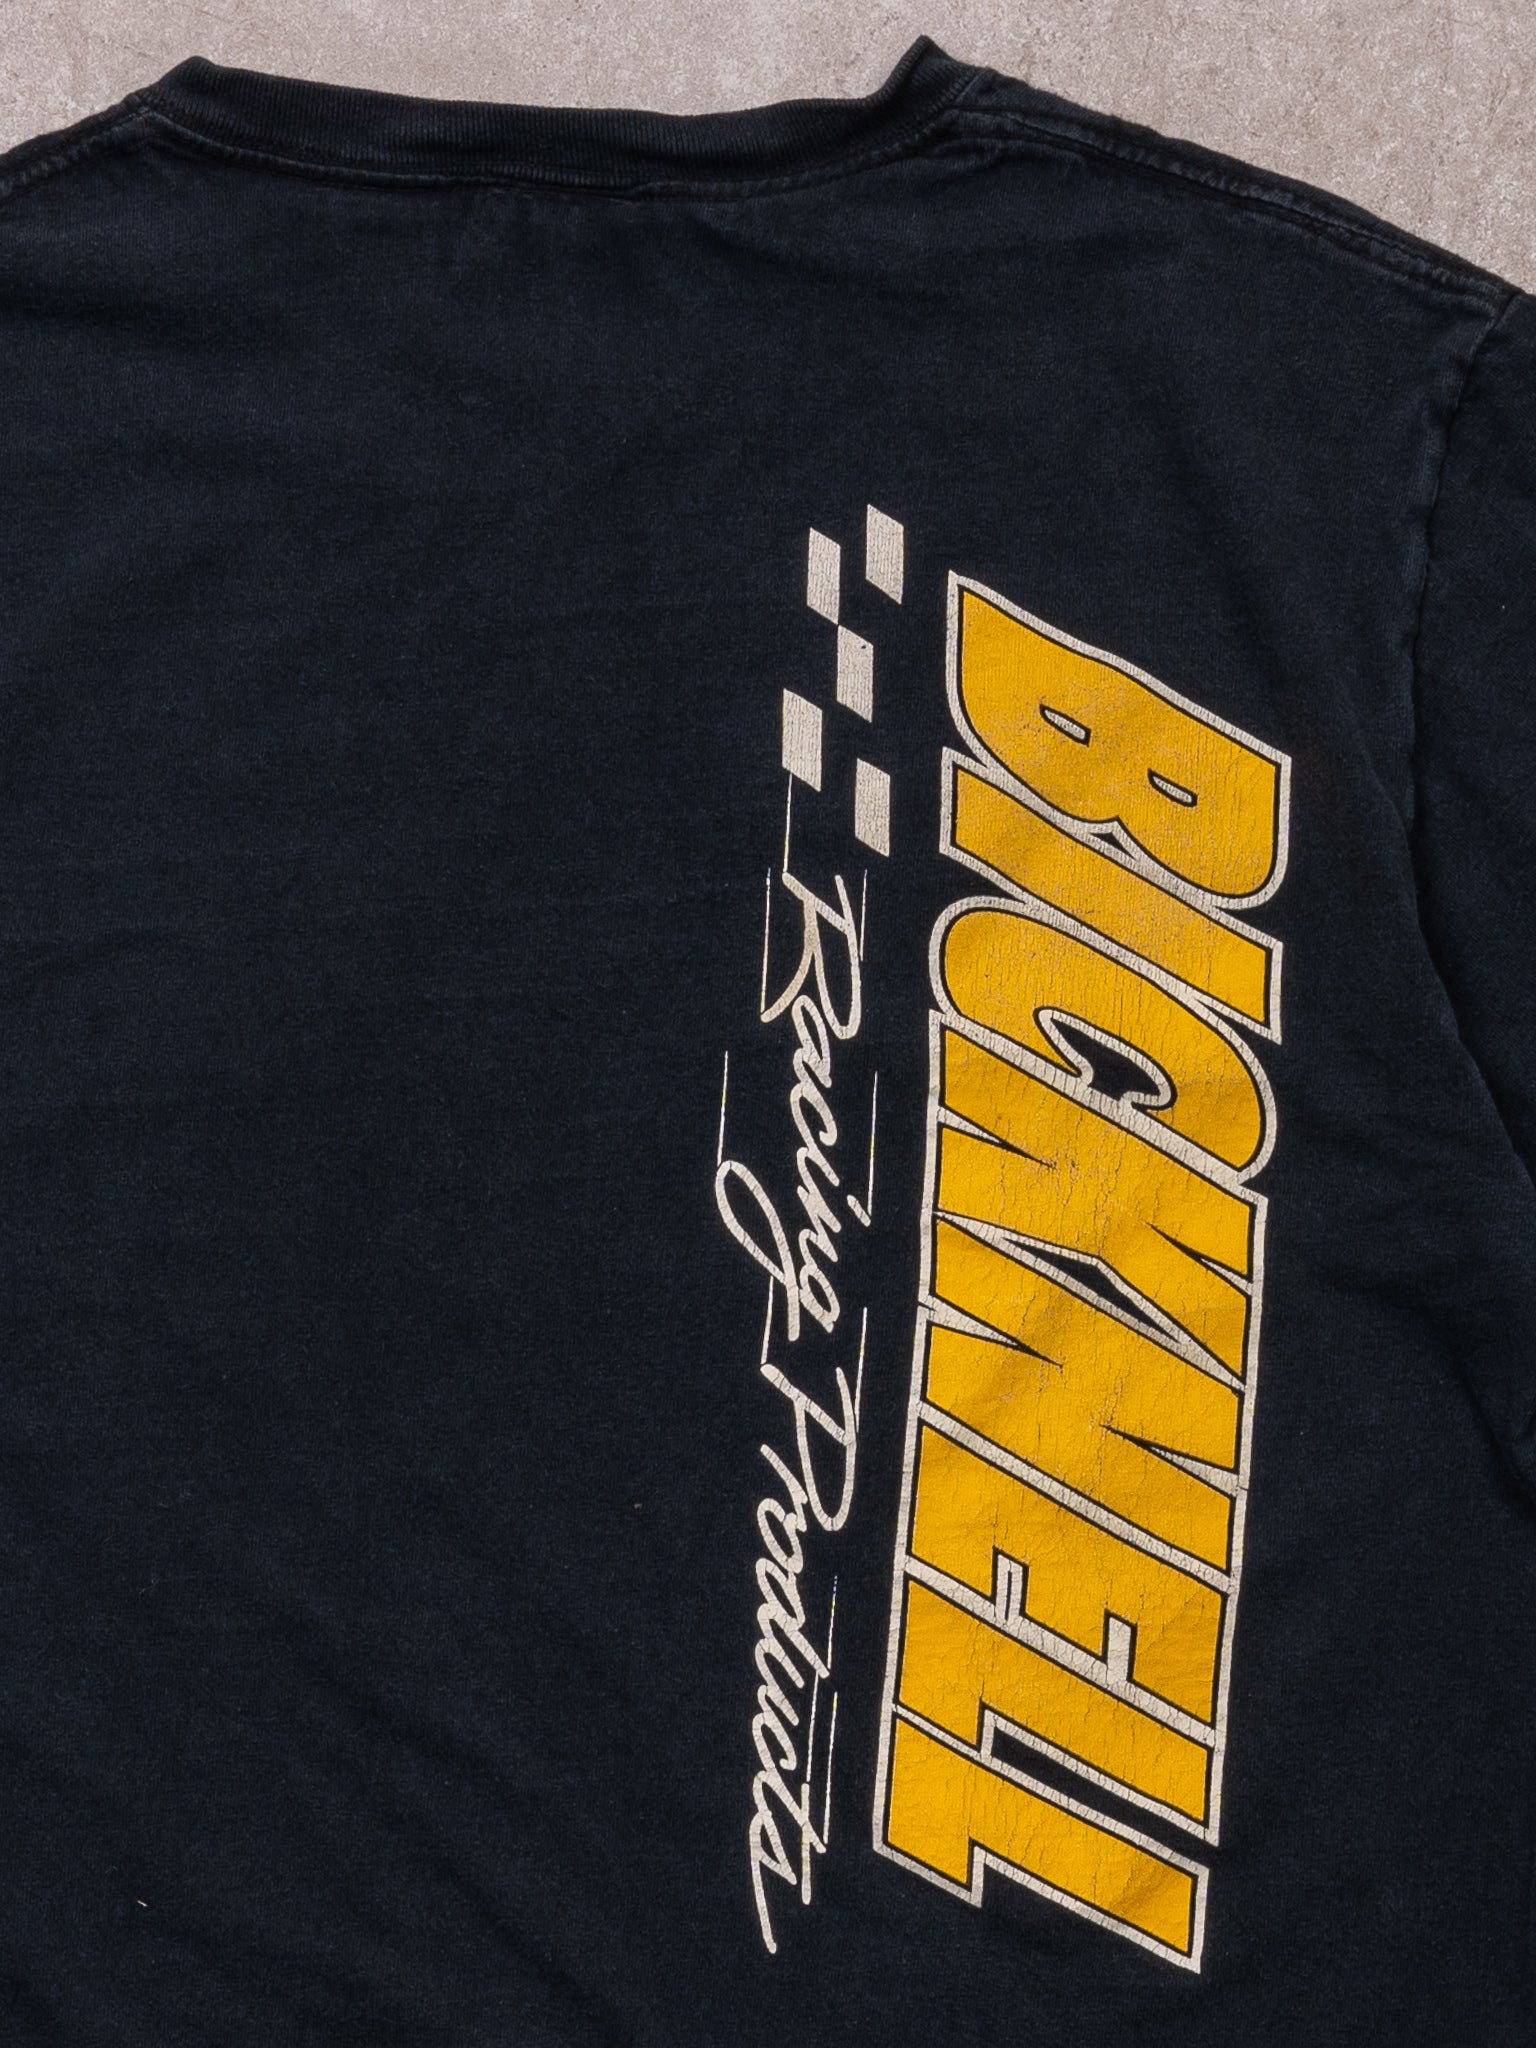 Vintage Black Bicknell Racing Products Tee (S)